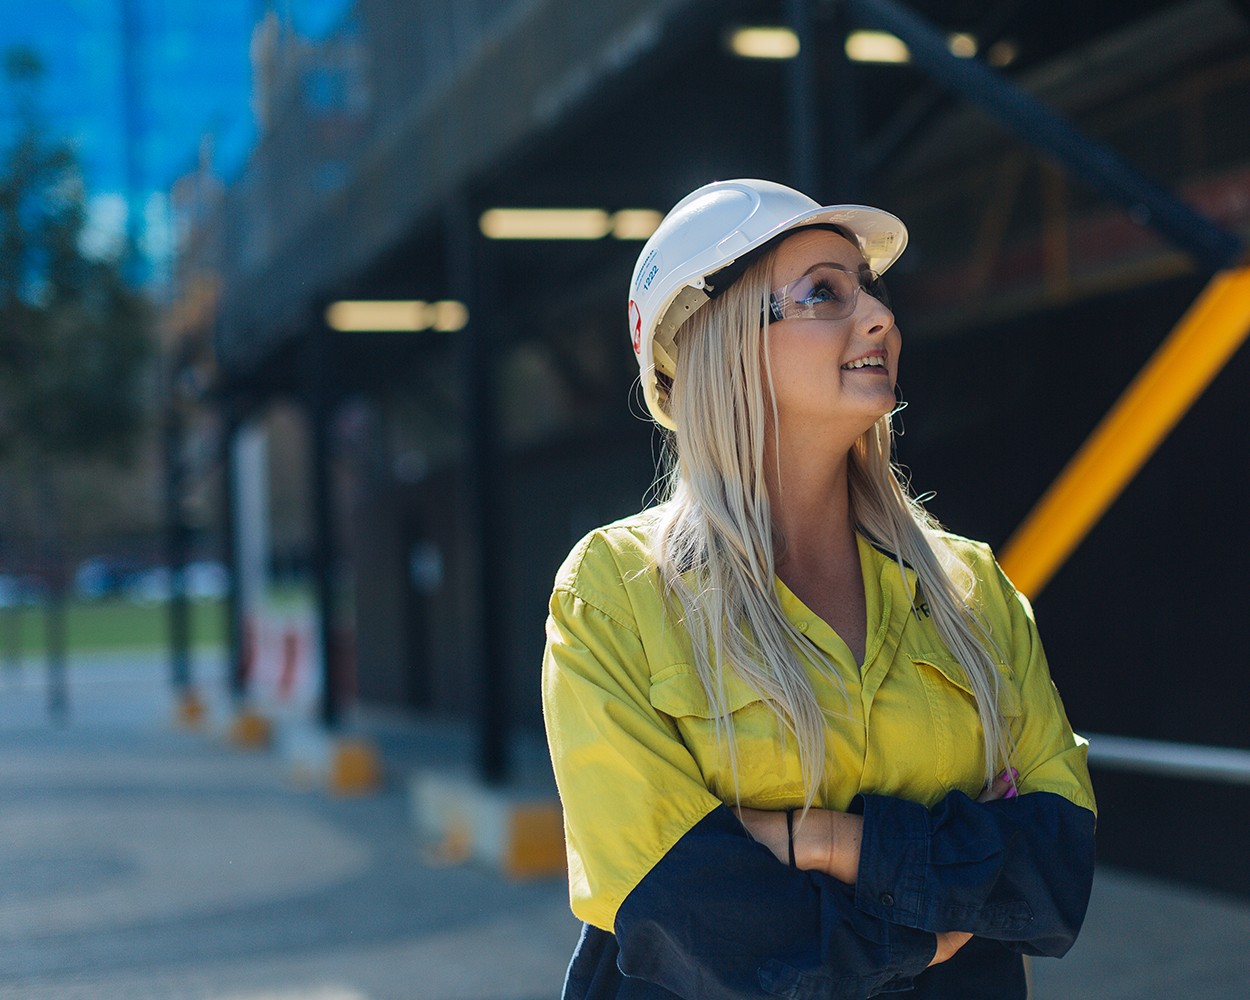 A female tradie looking up towards a building